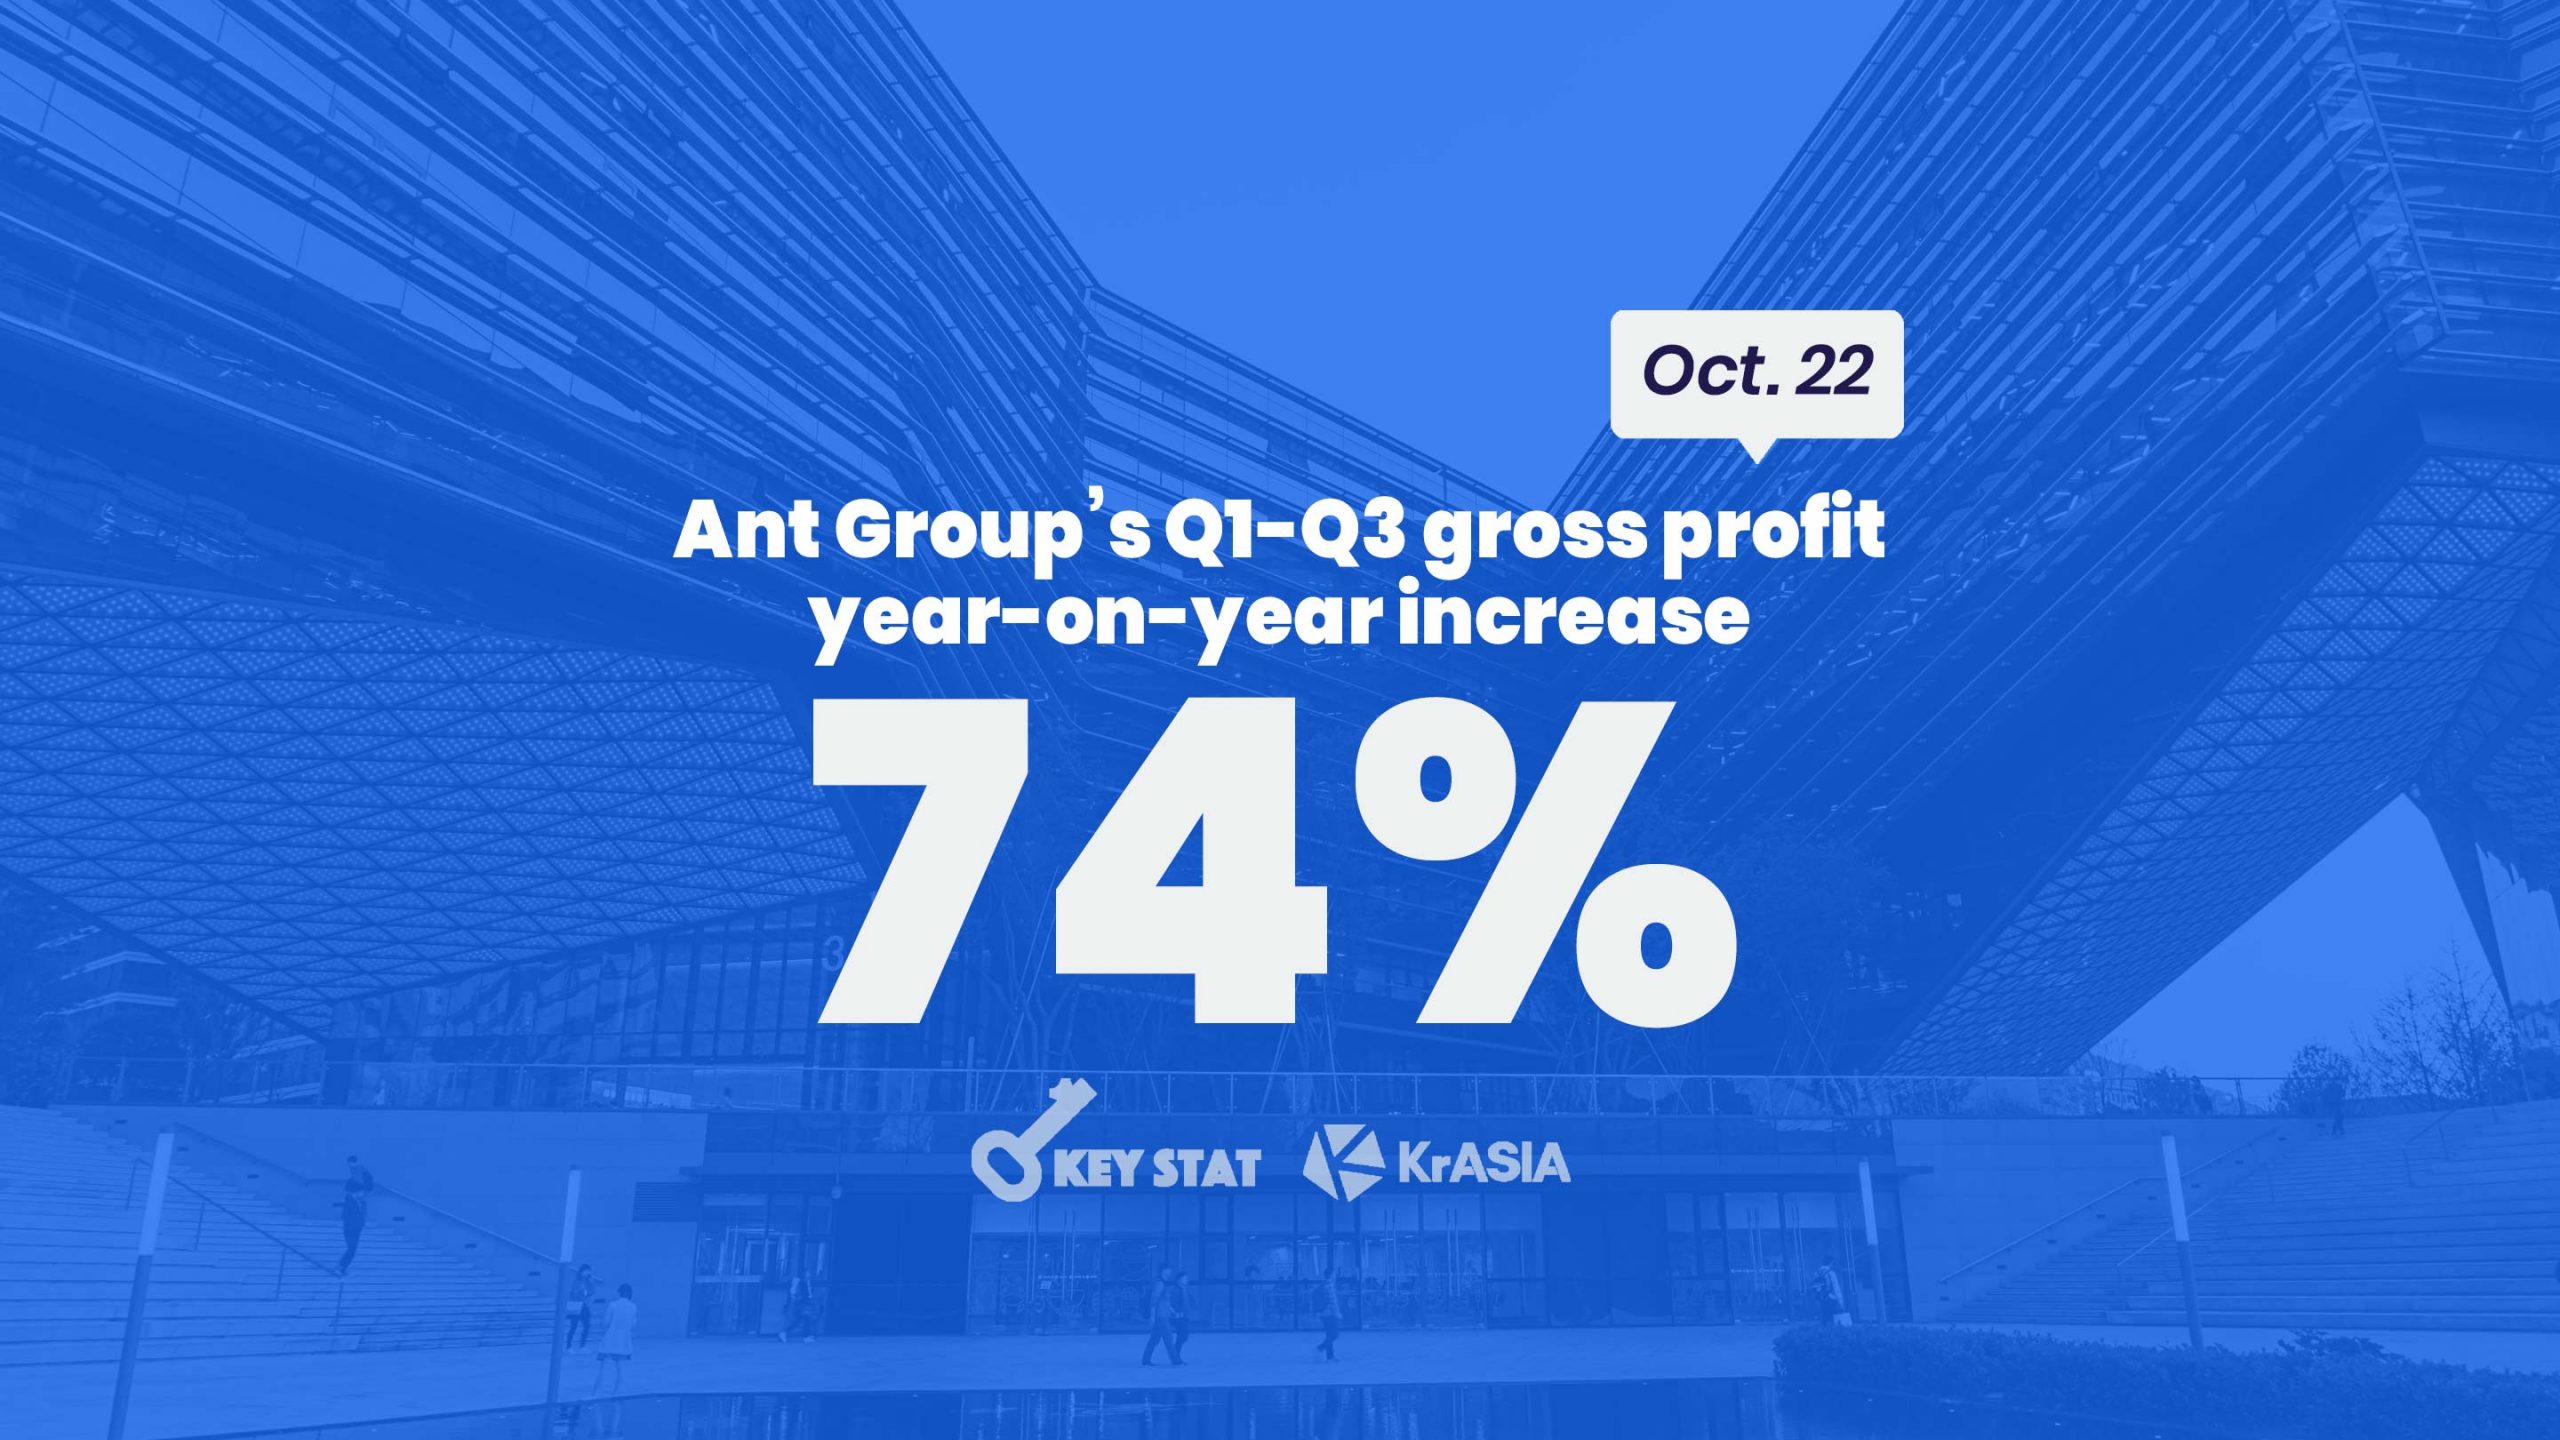 KEY STAT | Ant Group posts 74% year-on-year profit increase ahead of mega IPO